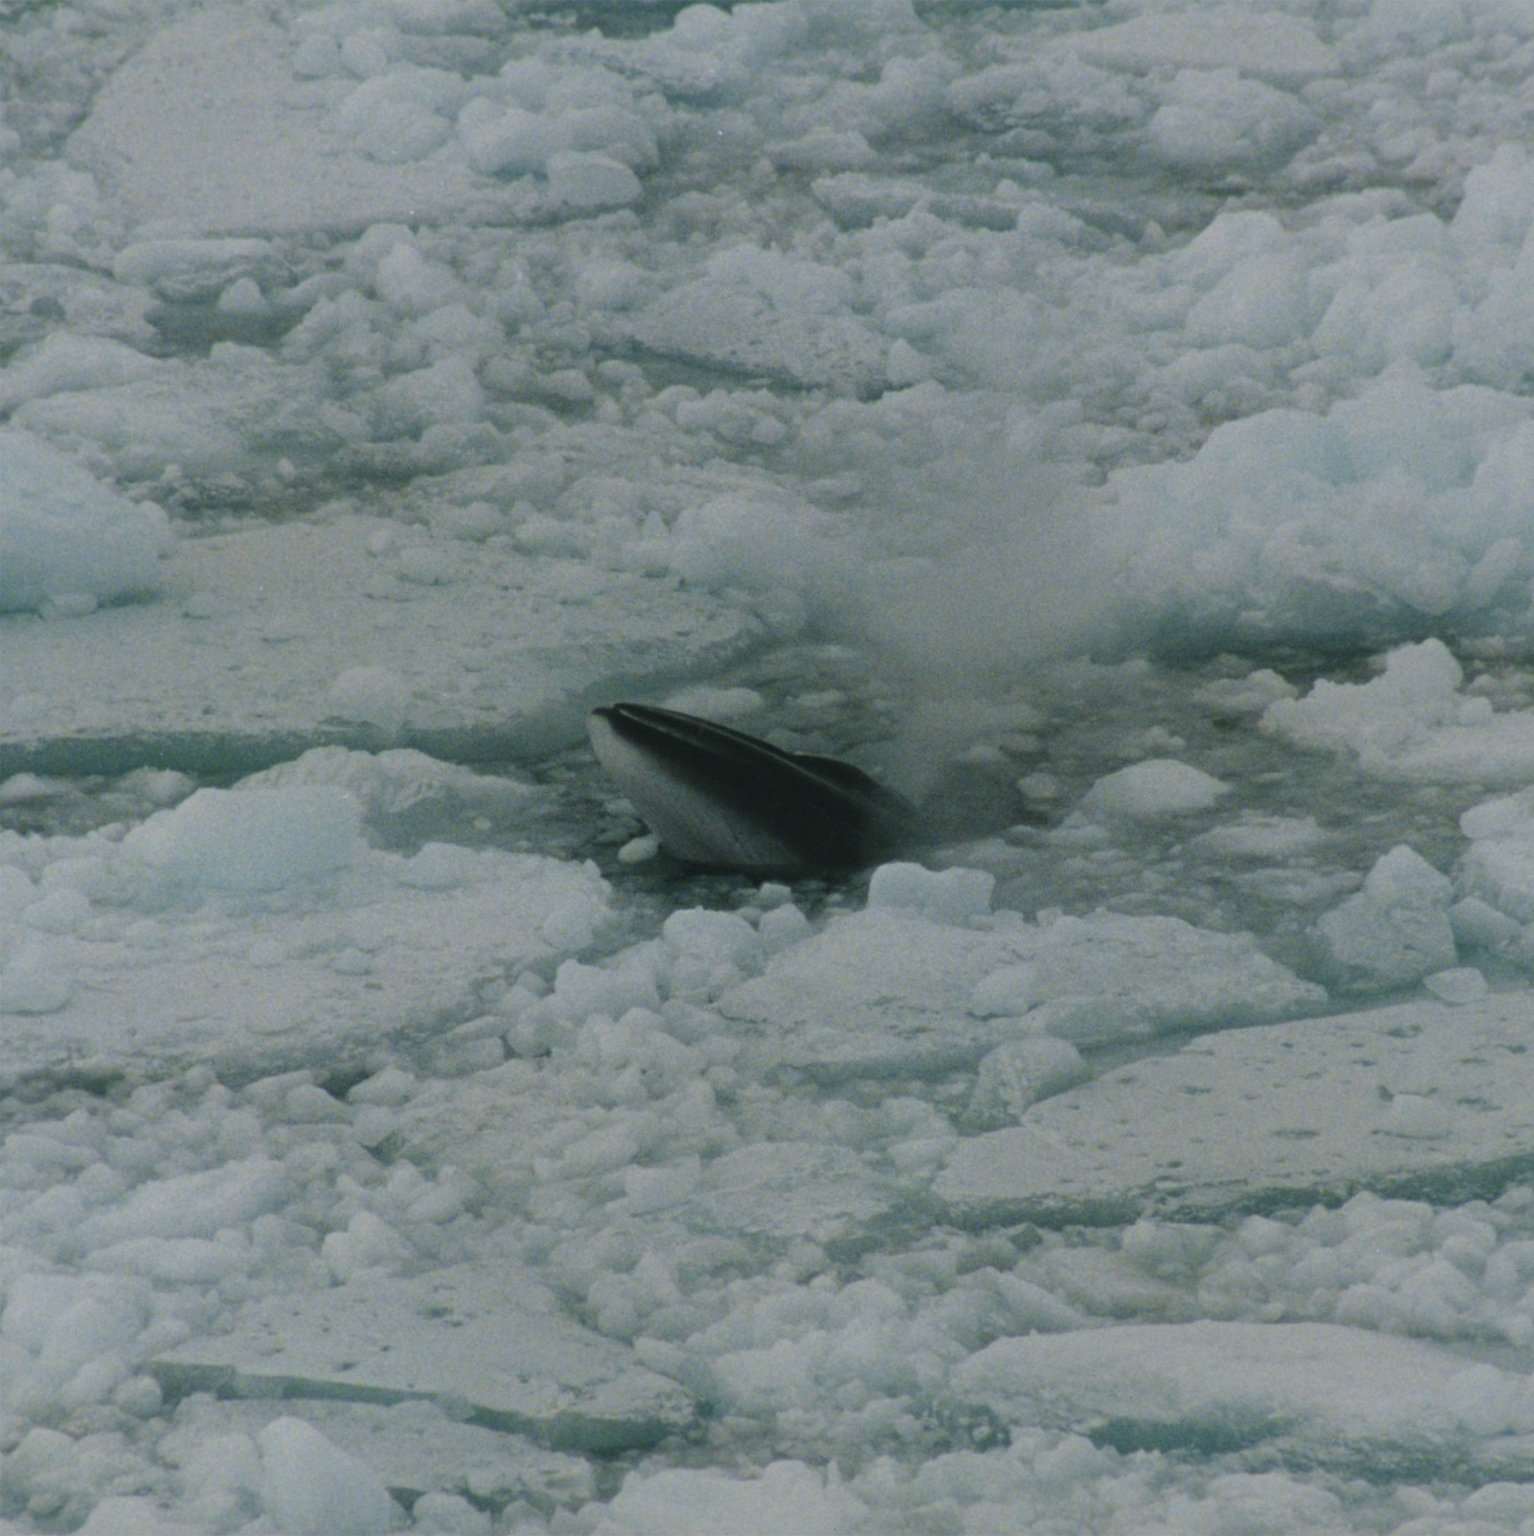 The minke whale feeds on krill under the ice in the Antarctic.